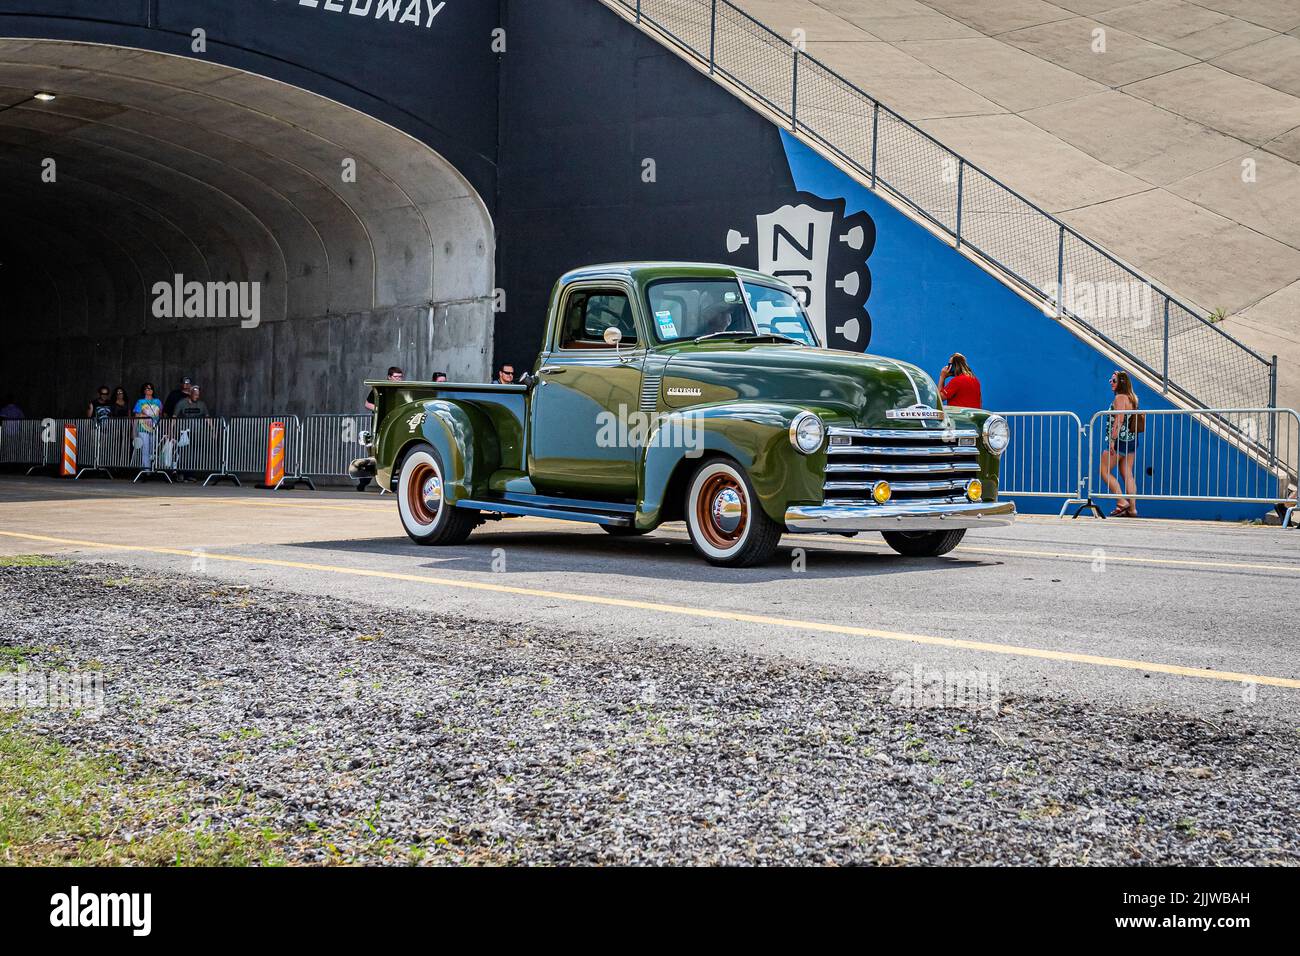 Lebanon, TN - May 14, 2022: Wide angle front corner view of a 1949 Chevrolet 3100 Pickup Truck at a local car show. Stock Photo